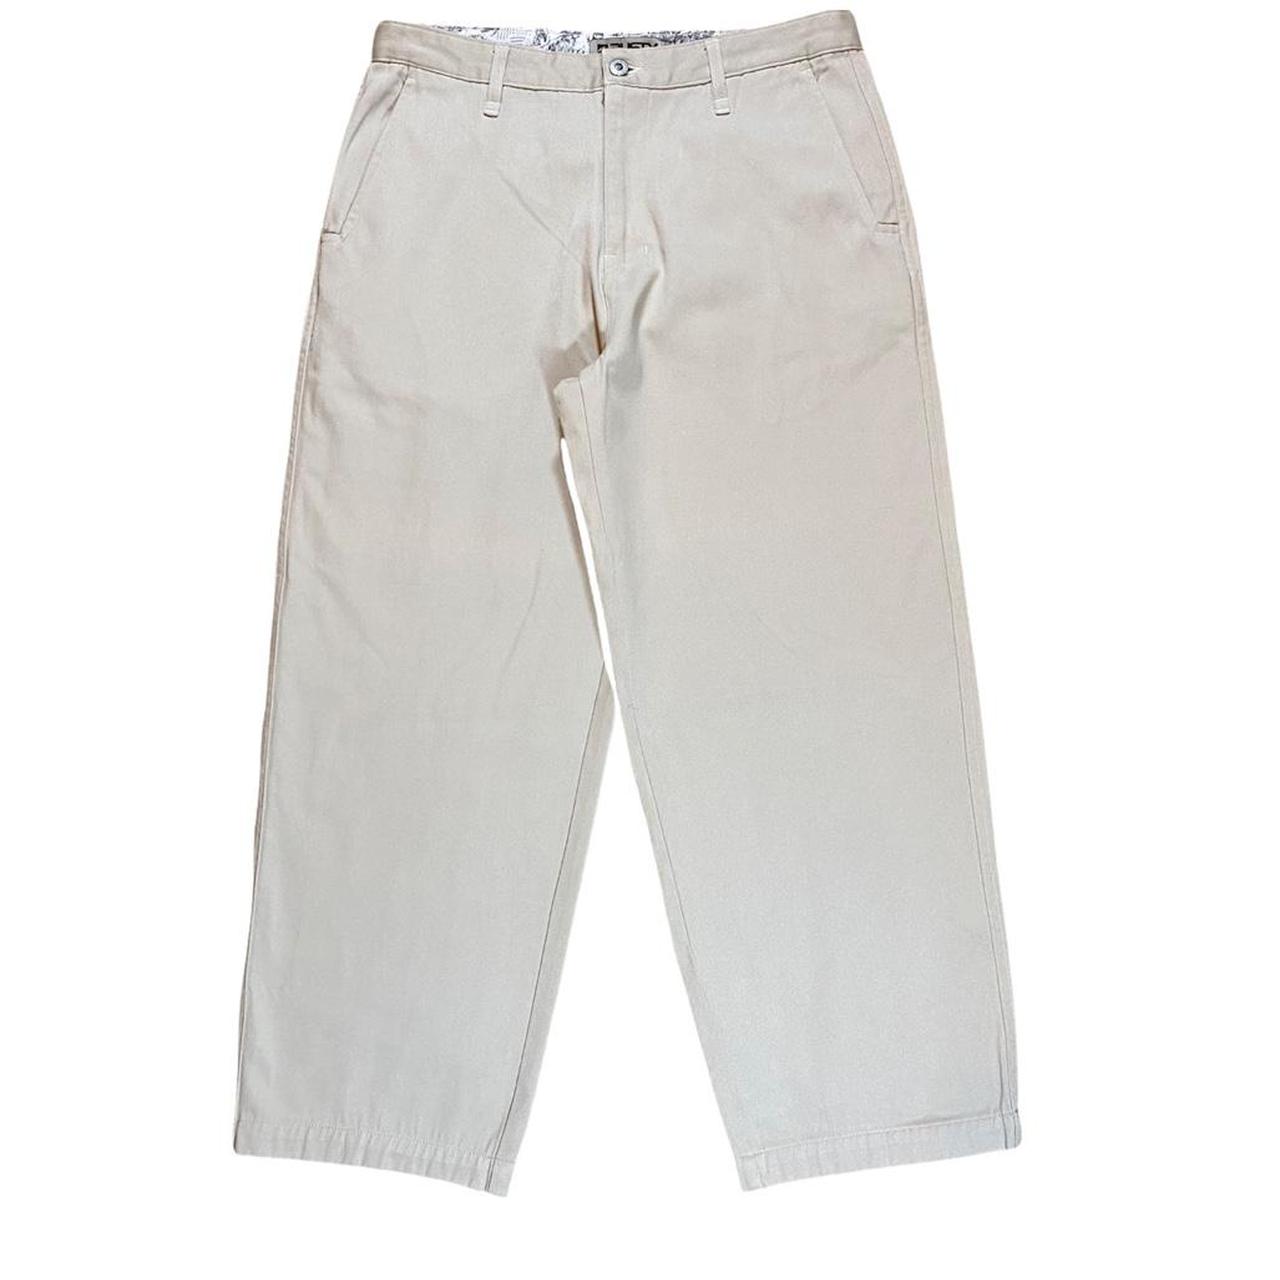 Product Image 1 - Vintage baggy rusty chinos. 

Size: